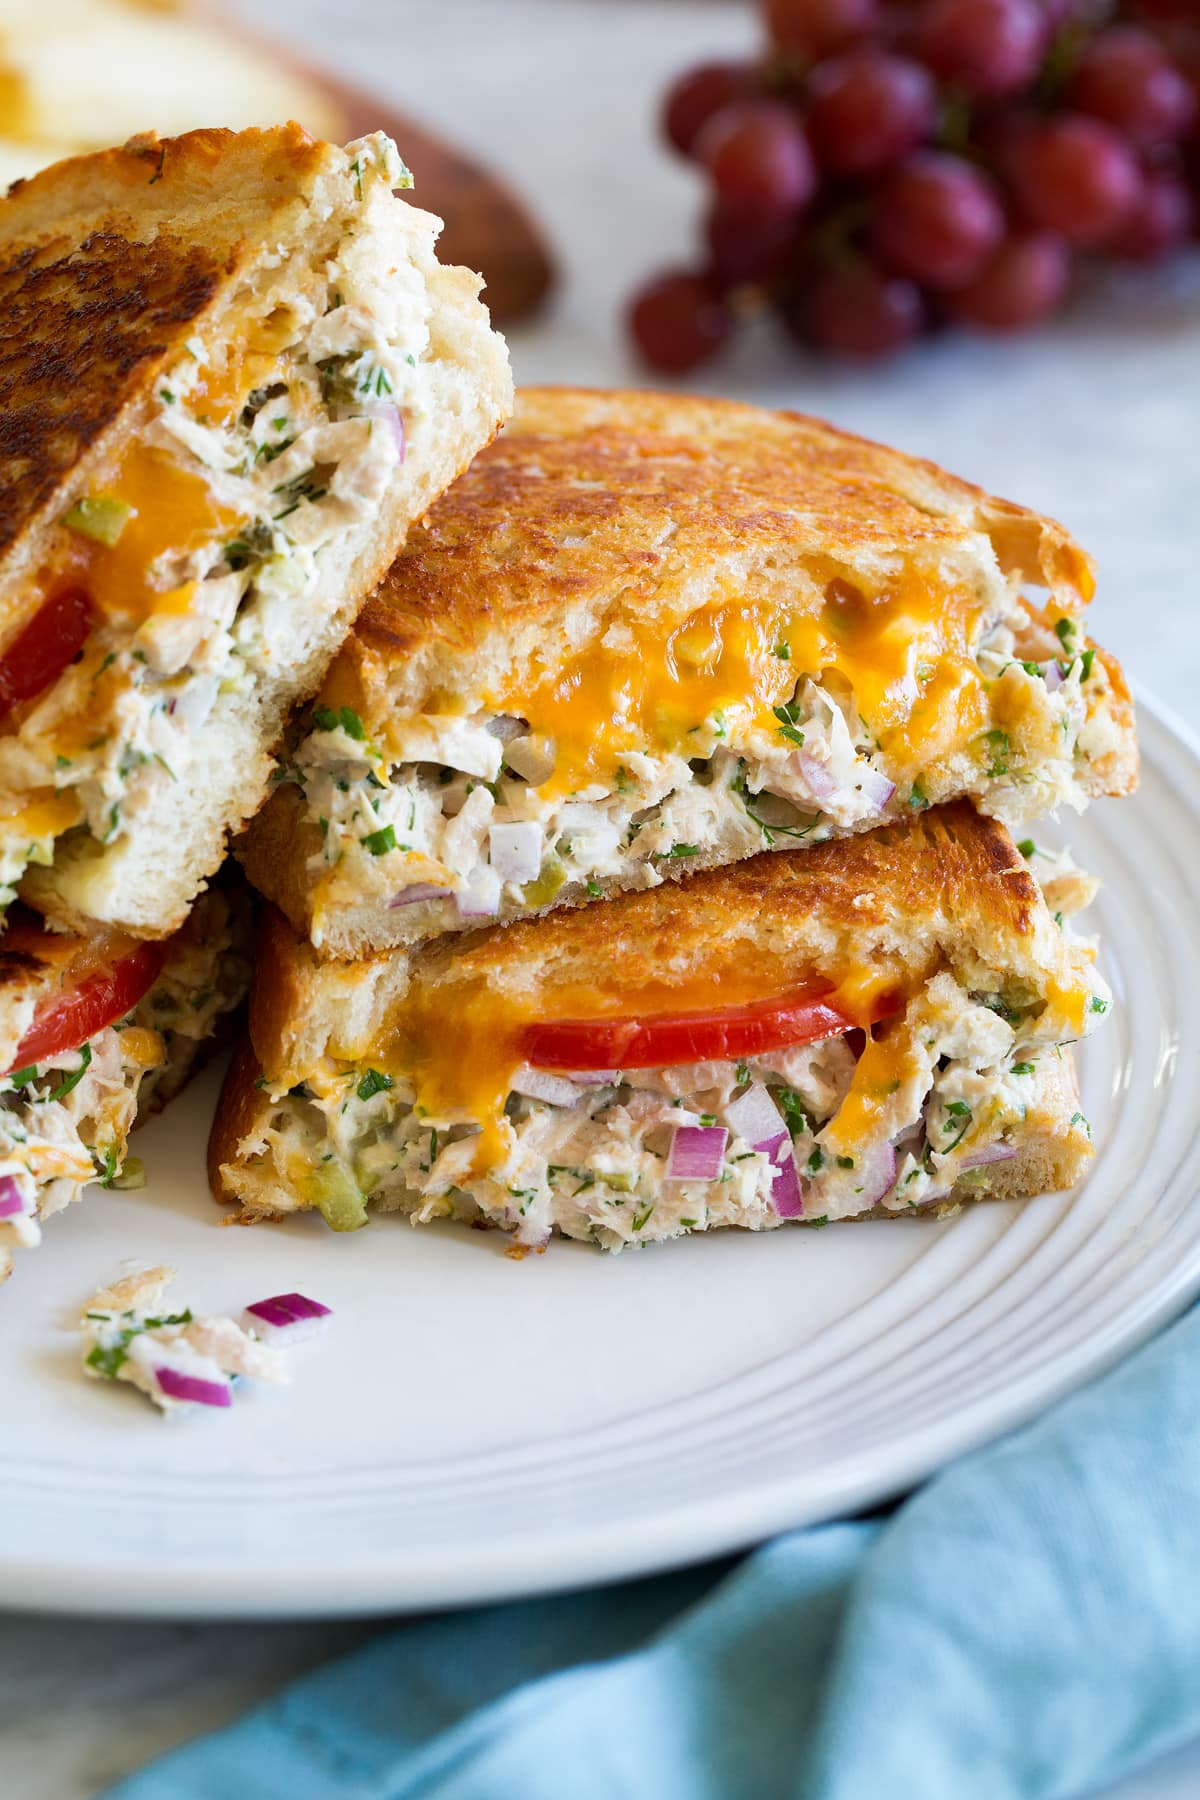 Close up photo of tuna melt sandwich with cheddar, tuna salad, tomatoes, and bread.